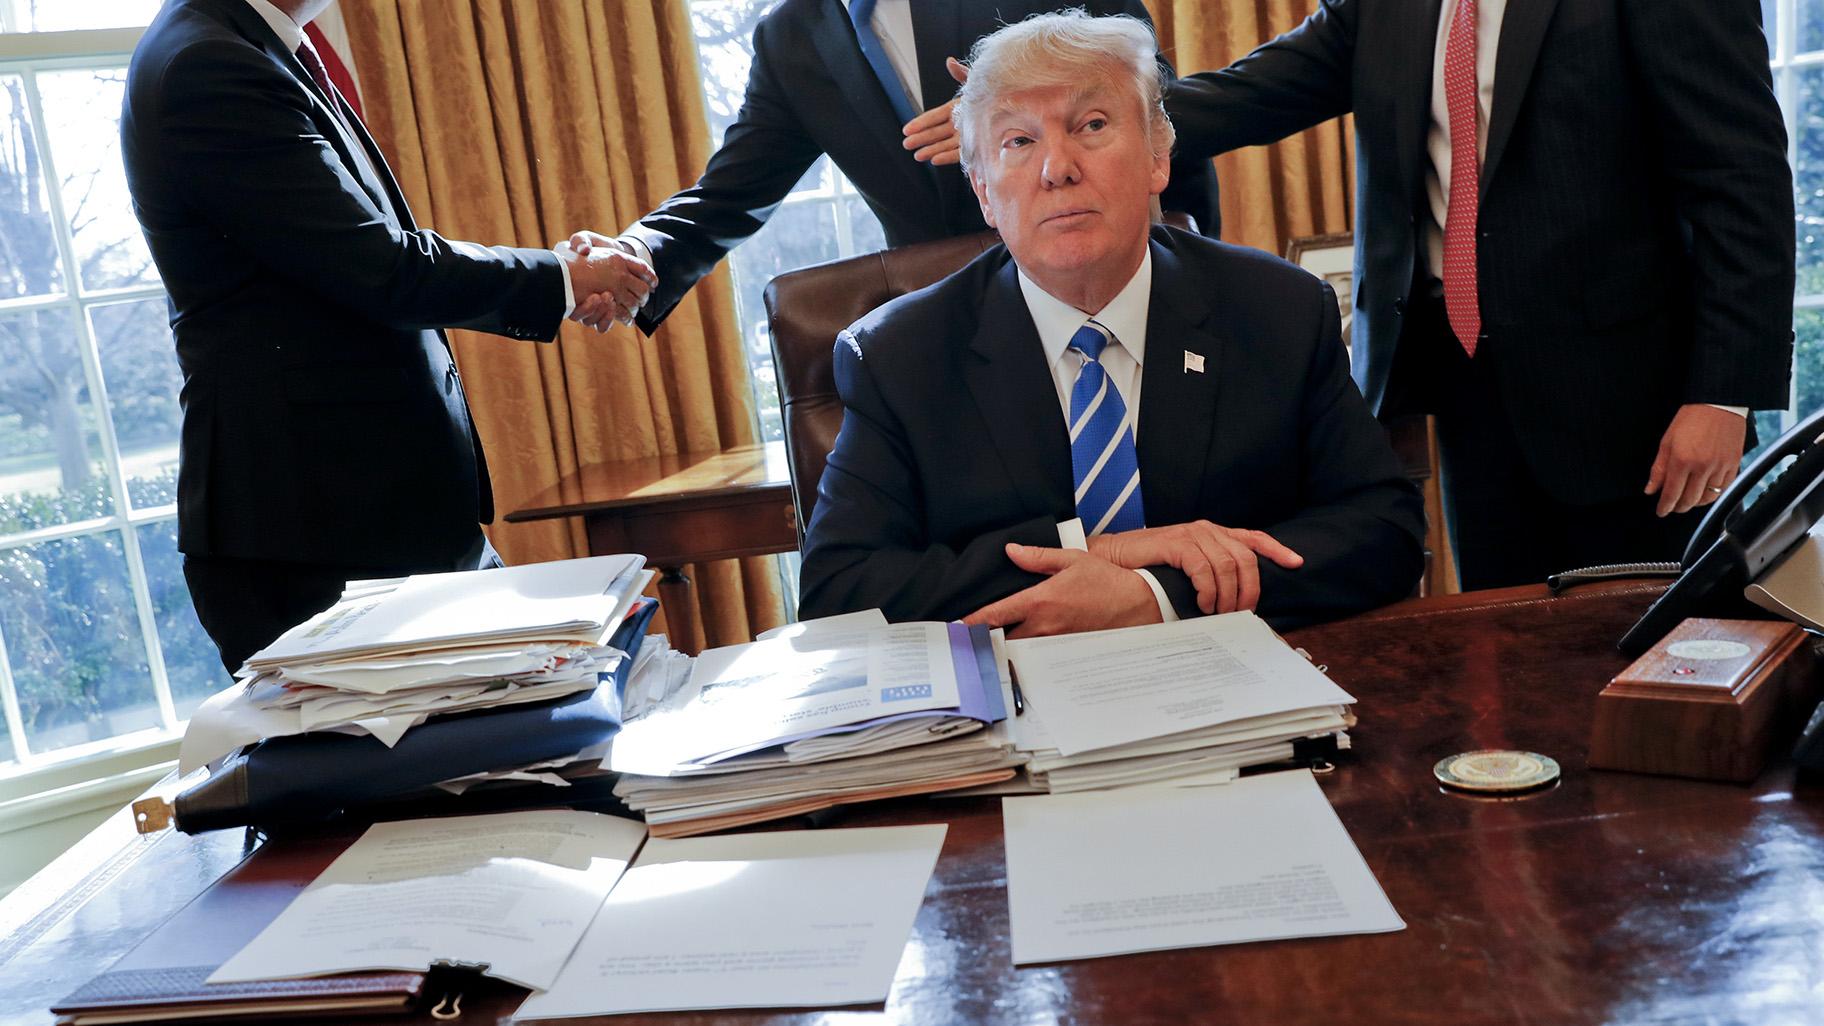 President Donald Trump sits at his desk after a meeting with Intel CEO Brian Krzanich, left, and members of his staff in the Oval Office of the White House in Washington, Feb. 8, 2017, as a lockbag is visible on the desk, the key still inside at left. (AP Photo / Pablo Martinez Monsivais, File)